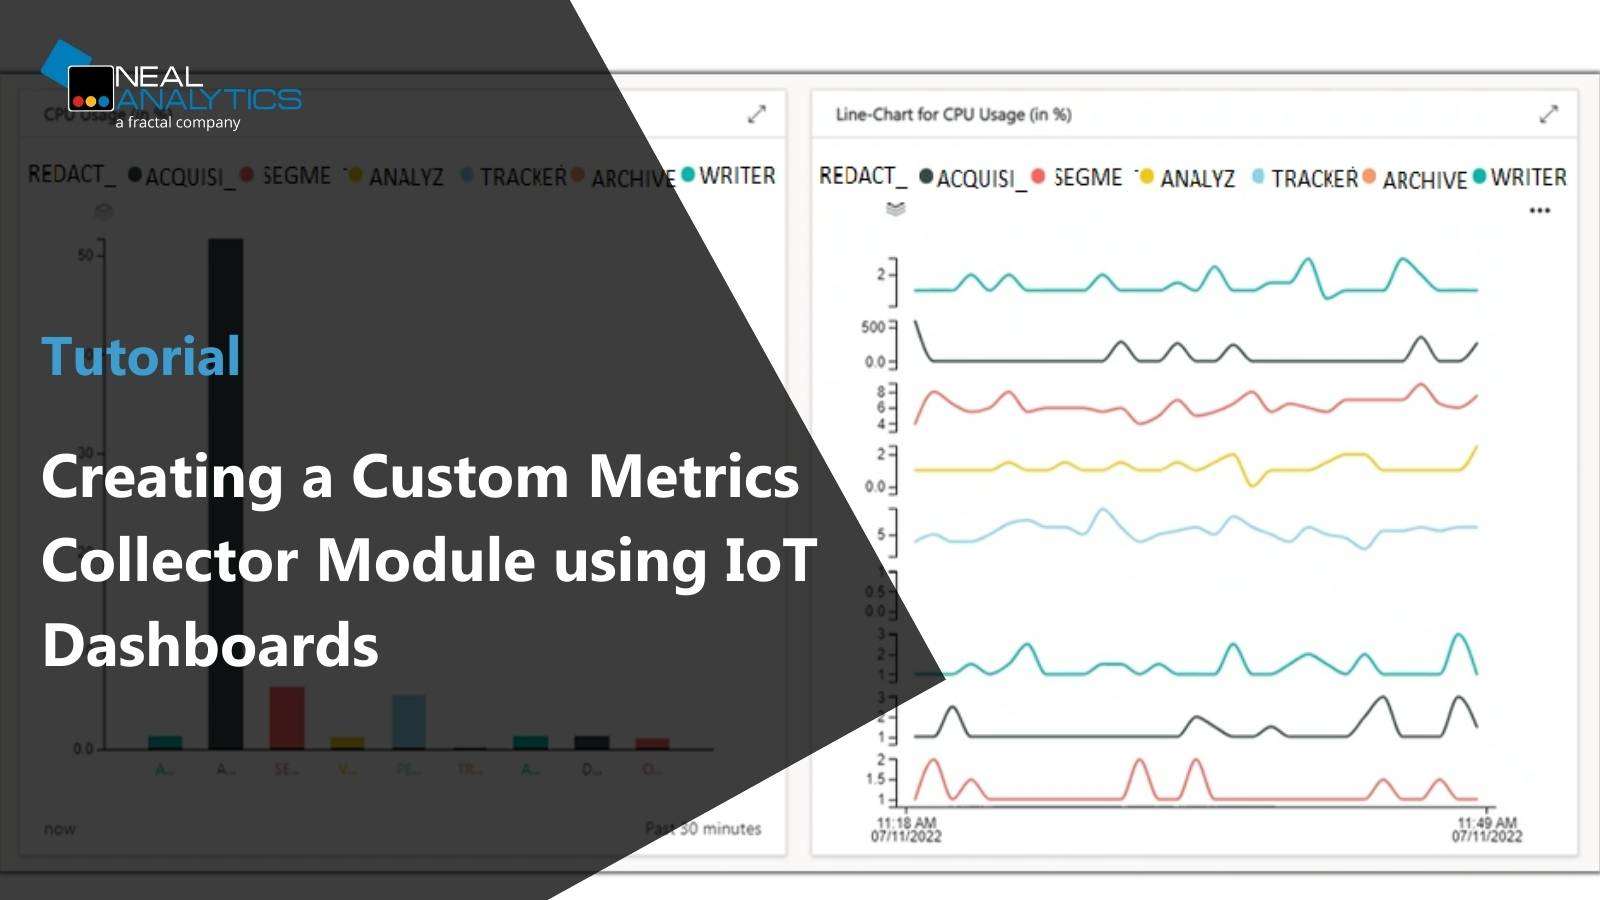 How to create a Custom Metrics Collector Module to visualize a system’s health using IoT Dashboards